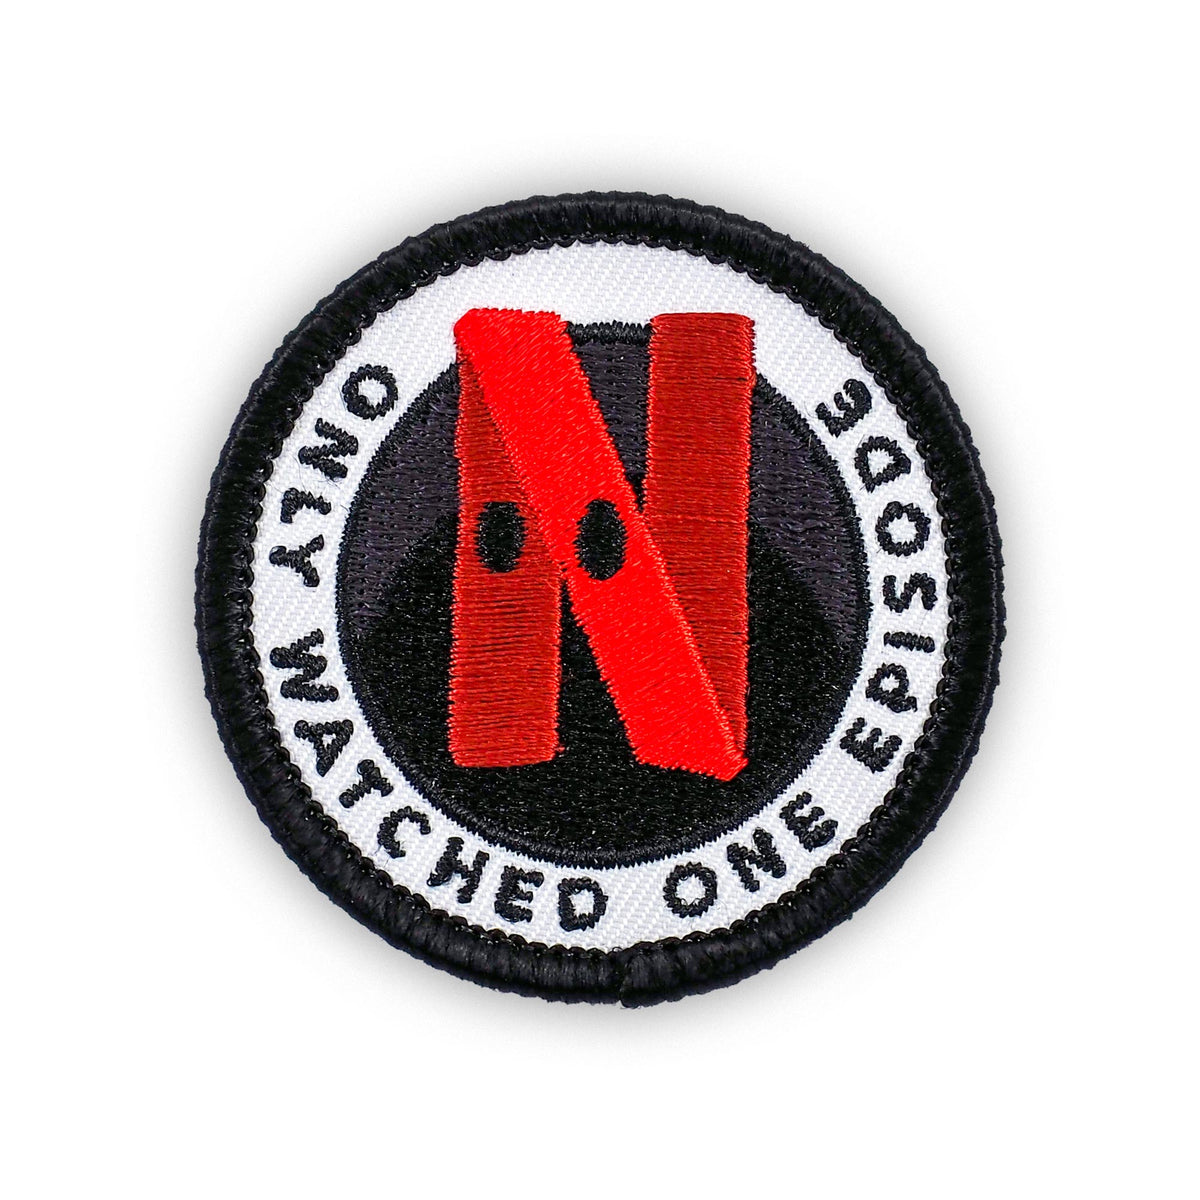 Only Watched One Episode adulting merit badge patch for adults